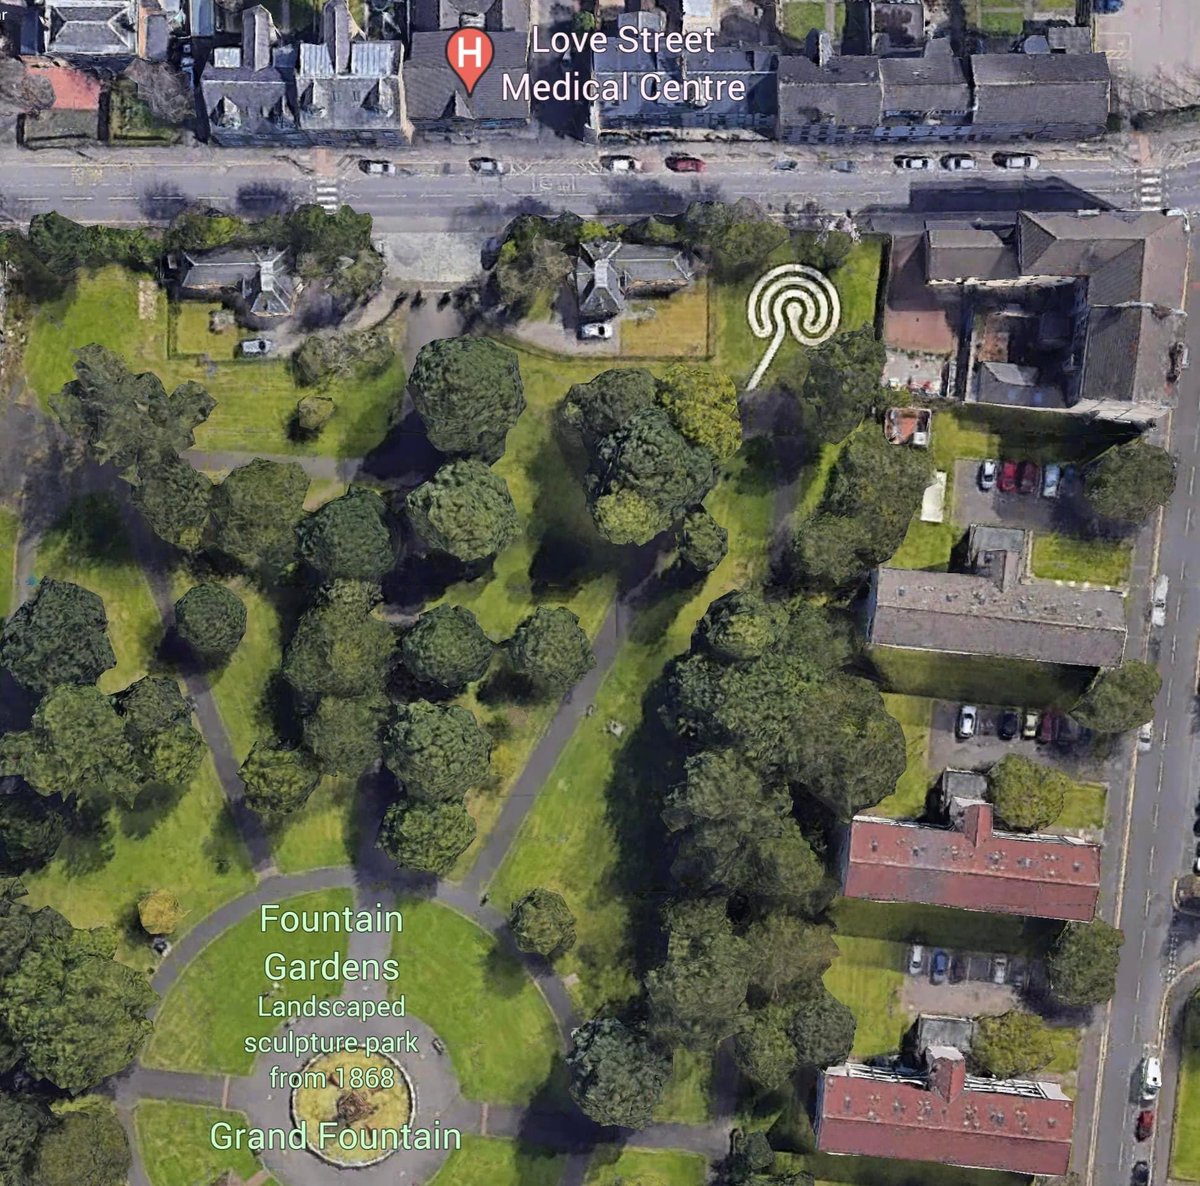 Check these fab Google Earth pics of our Community #Labyrinth in #FountainGardens #Paisley 🤩 Come join us today at 1pm for #WorldLabyrinthDay as we #WalkAsOneAtOne